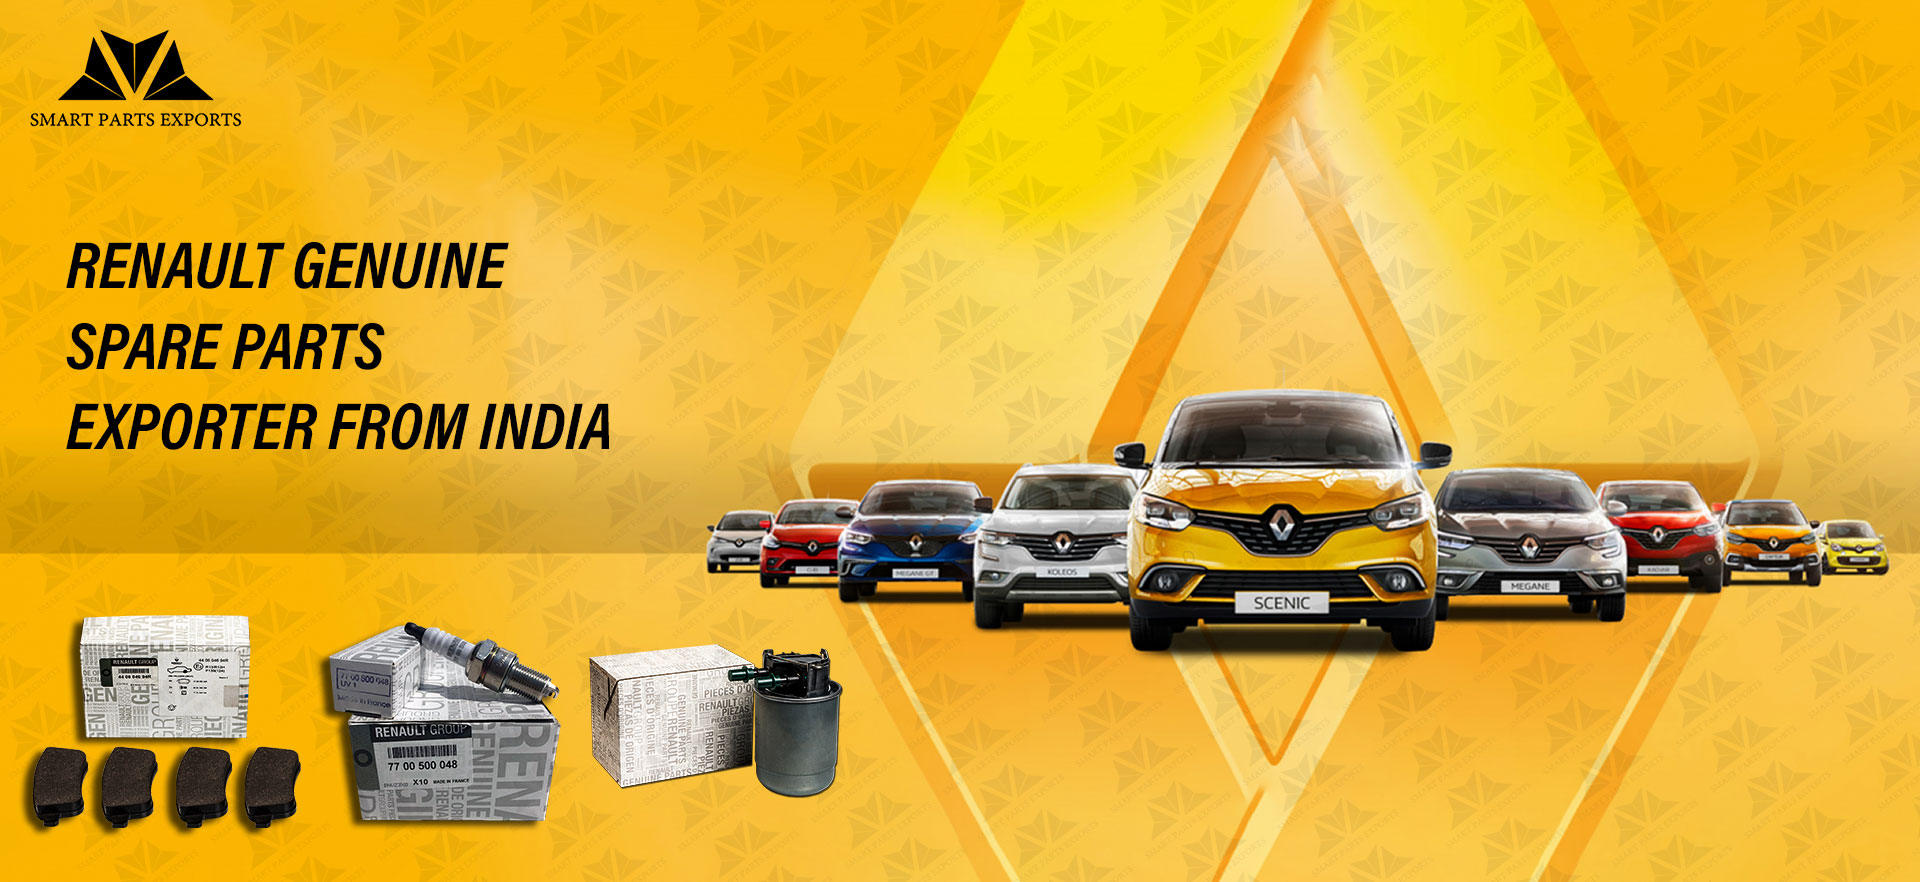 Renault Genuine Spare Parts Exporter from India